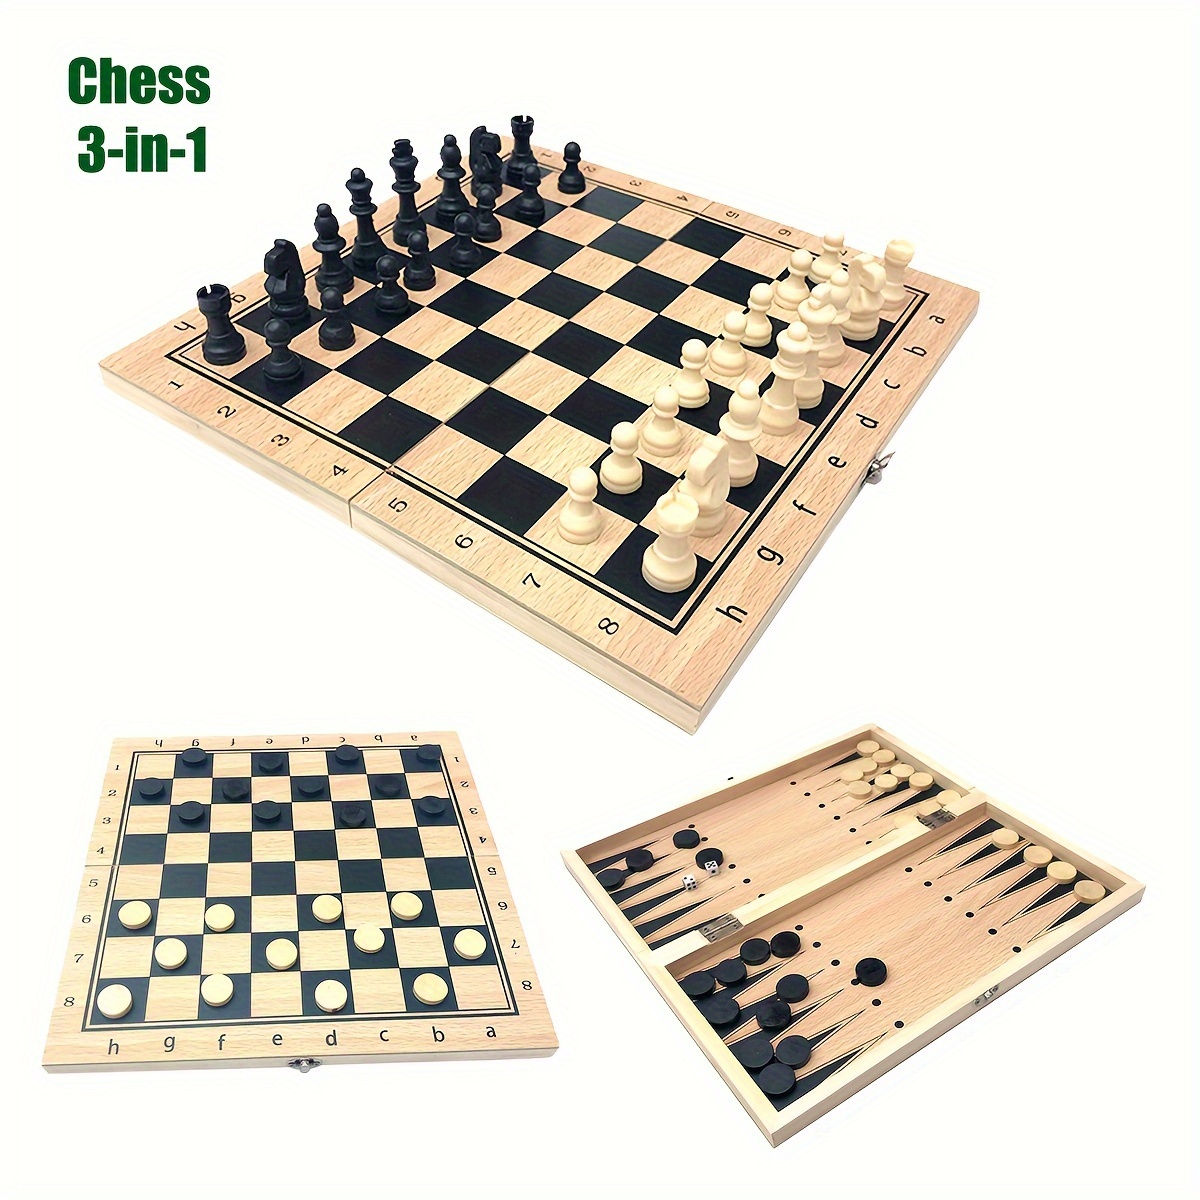 

Premium 3-in-1 Wooden Chess Set With Folding Storage - Includes Classic Chess, Backgammon & Checkers For Adults